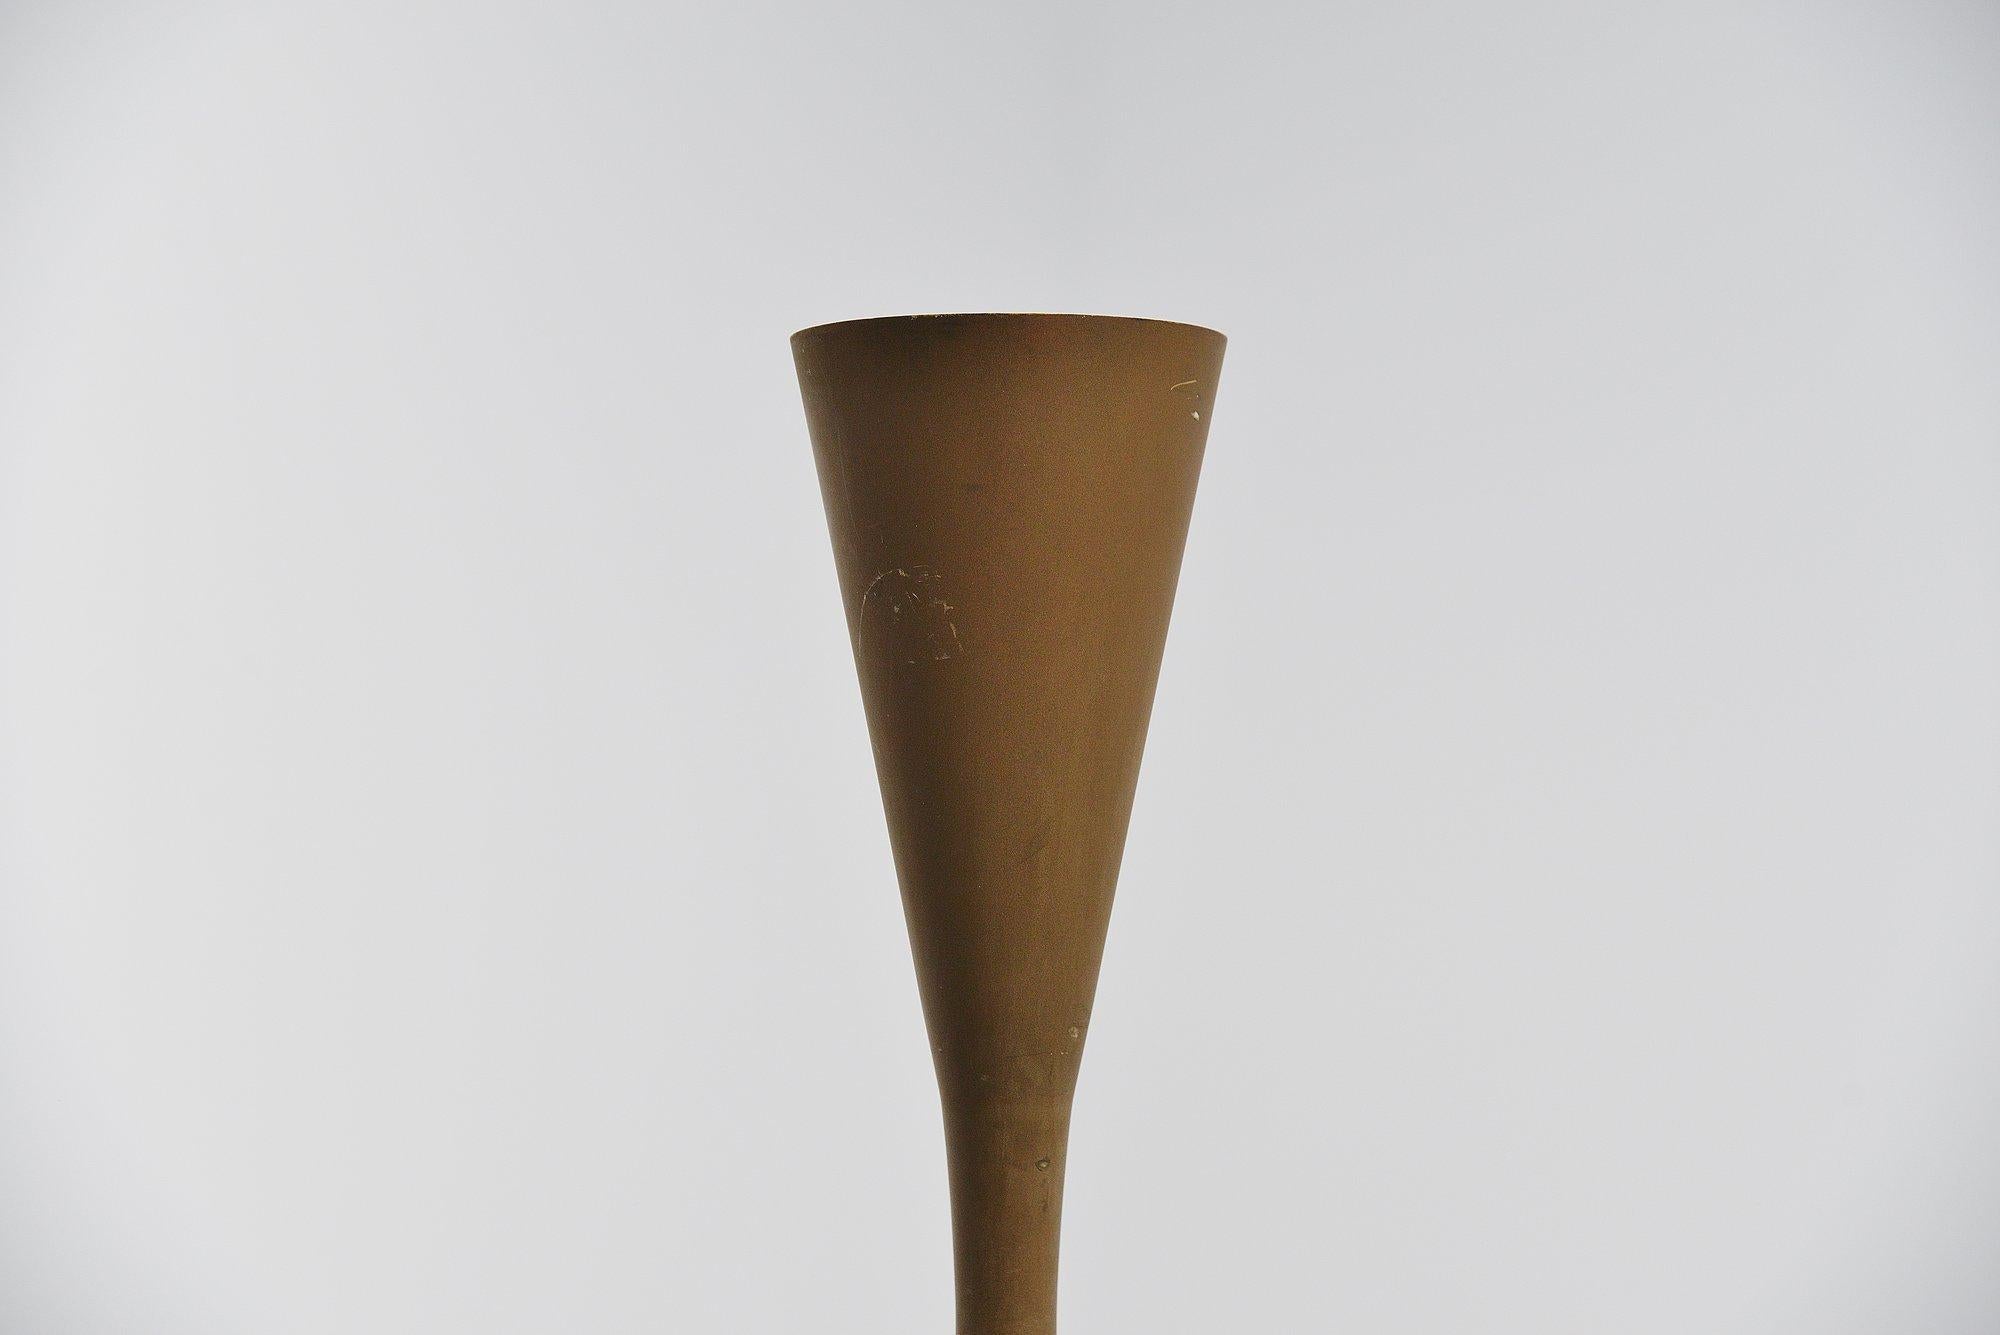 Very nice and rare early Luminator floor lamp designed by Pietro Chiesa and manufactured by Fontana Arte, Italy, 1935. This example is probably from 1950. The lamp is in brass patinated metal and has a very nice patina from age and usage. This